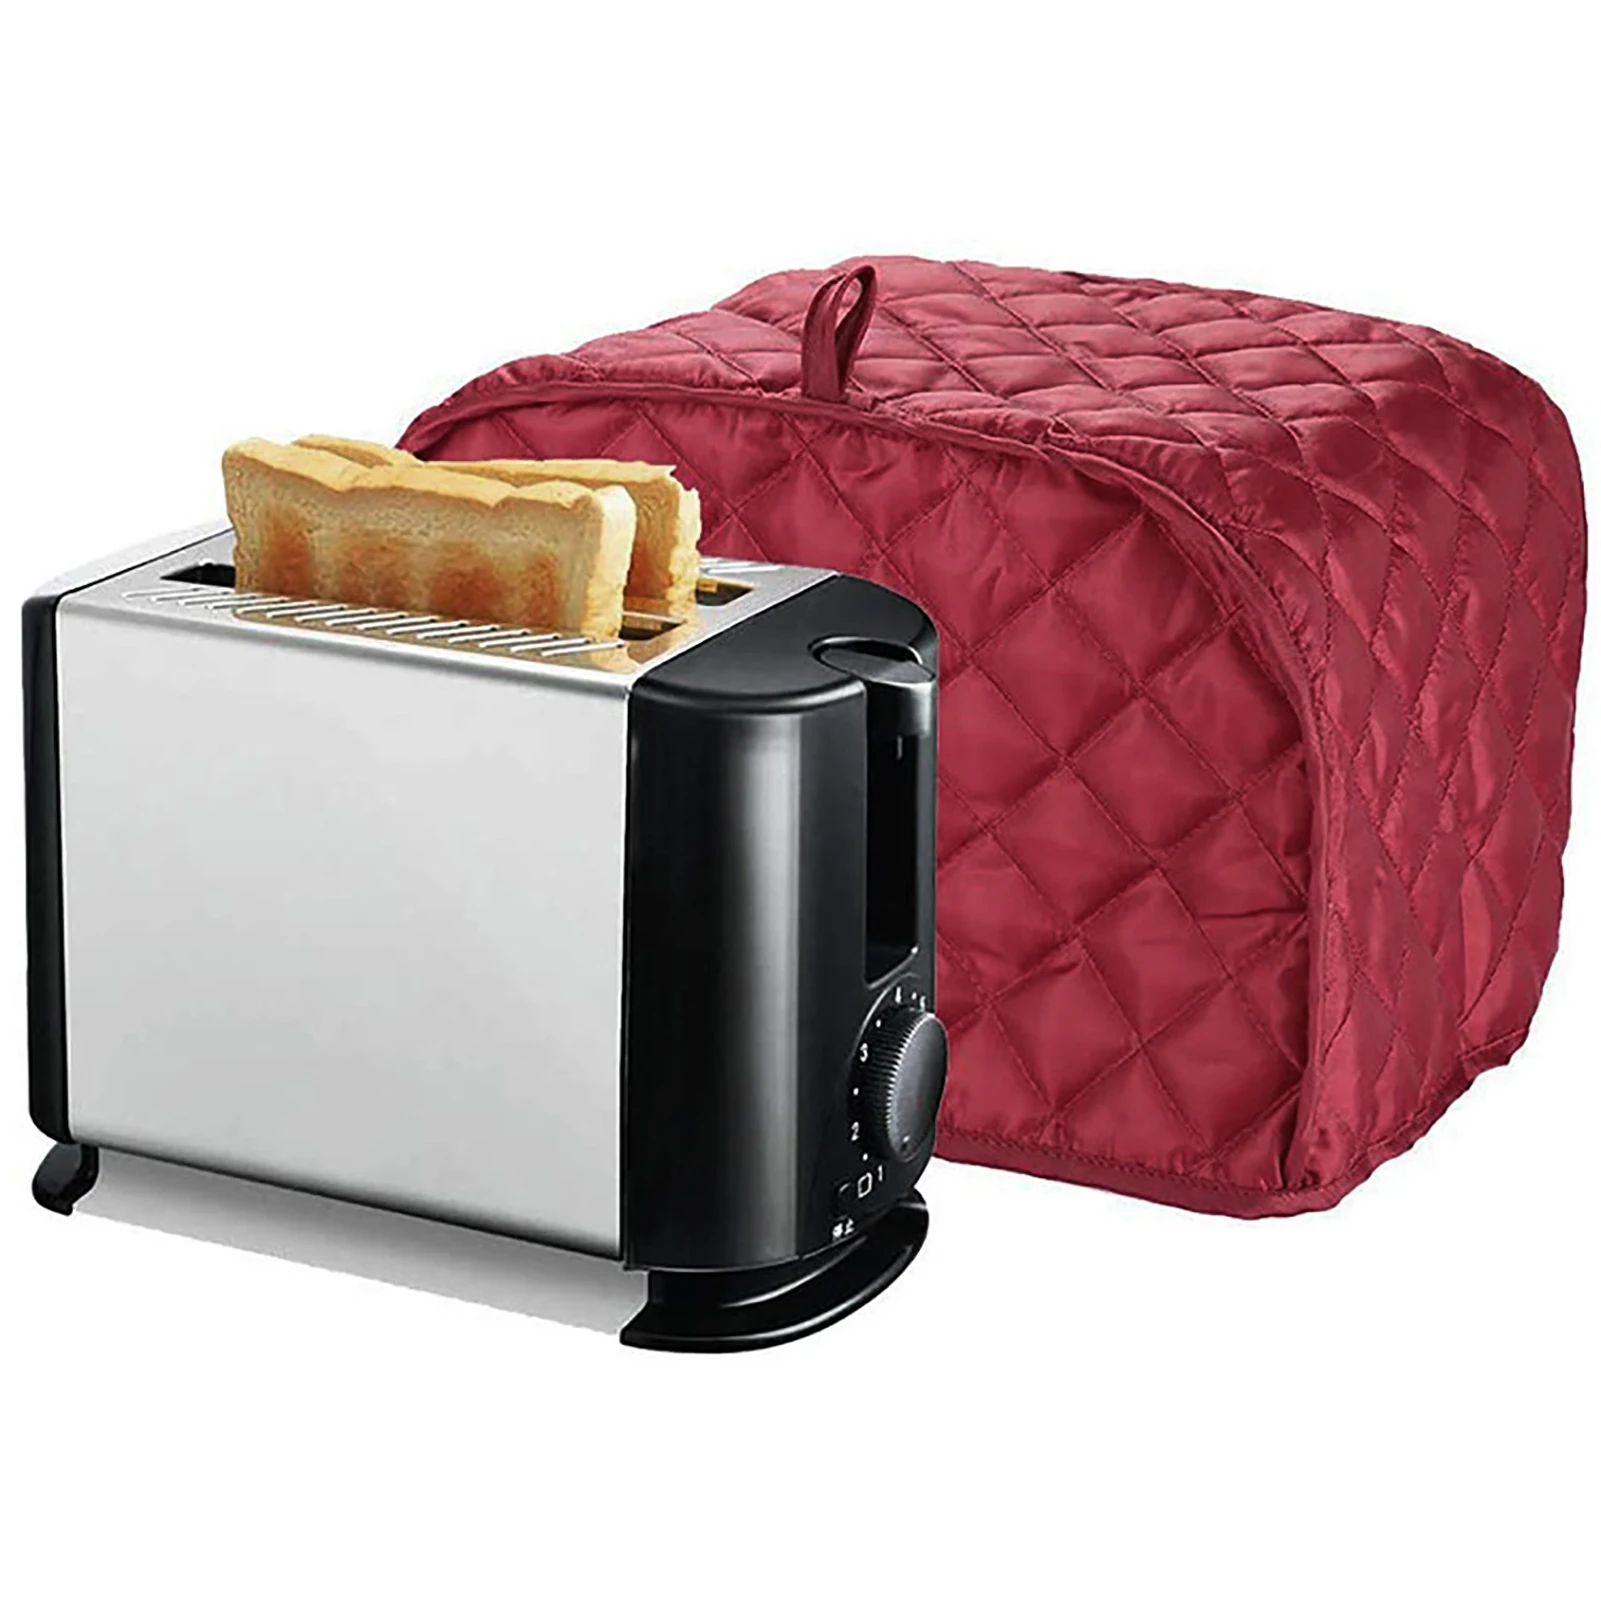 Shopline Toaster Cover Polyester Toaster Cover for Four Slice Toaster and Dust